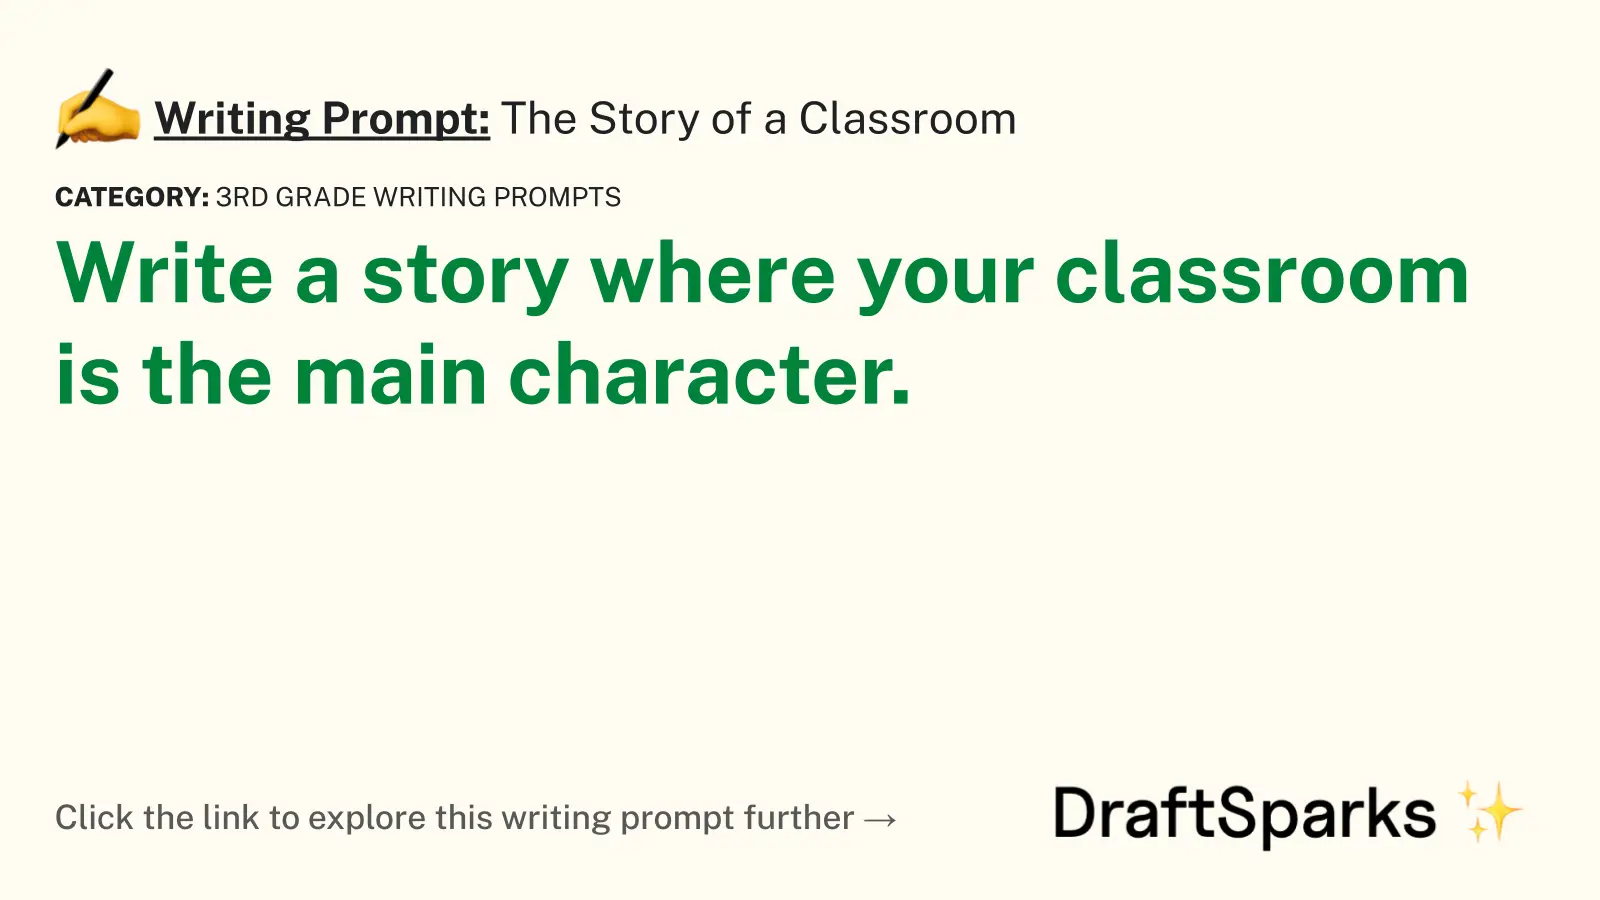 The Story of a Classroom